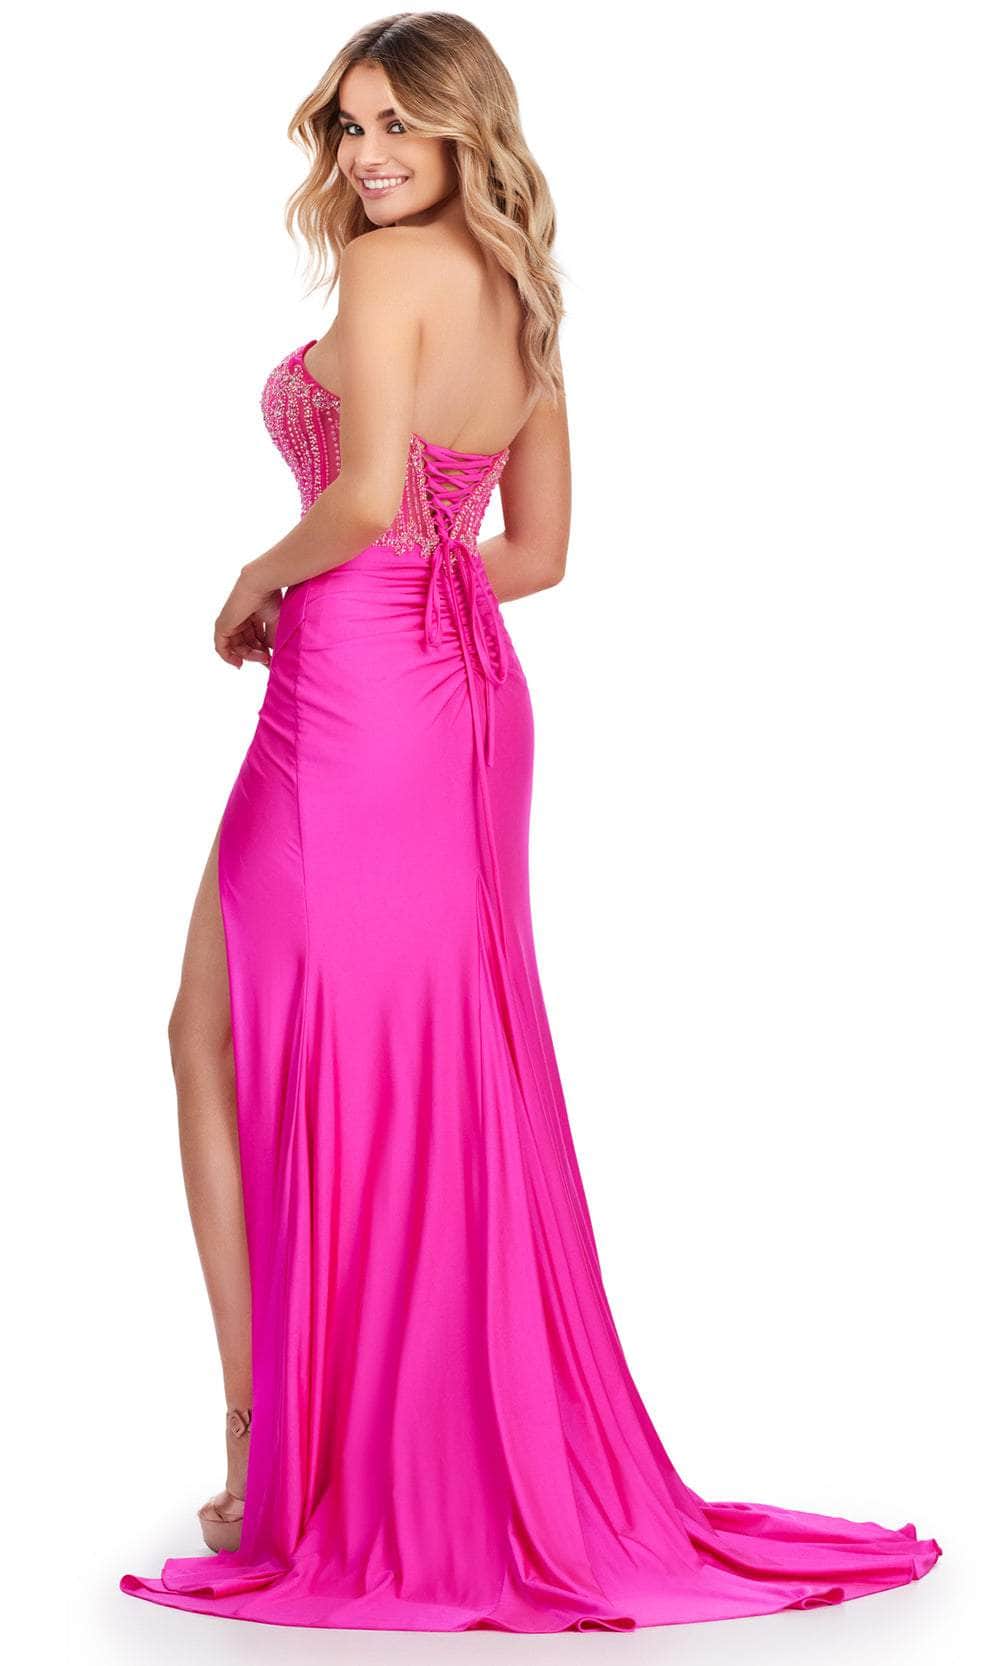 Ashley Lauren 11520 - Ruched Strapless Prom Gown Prom Dresses